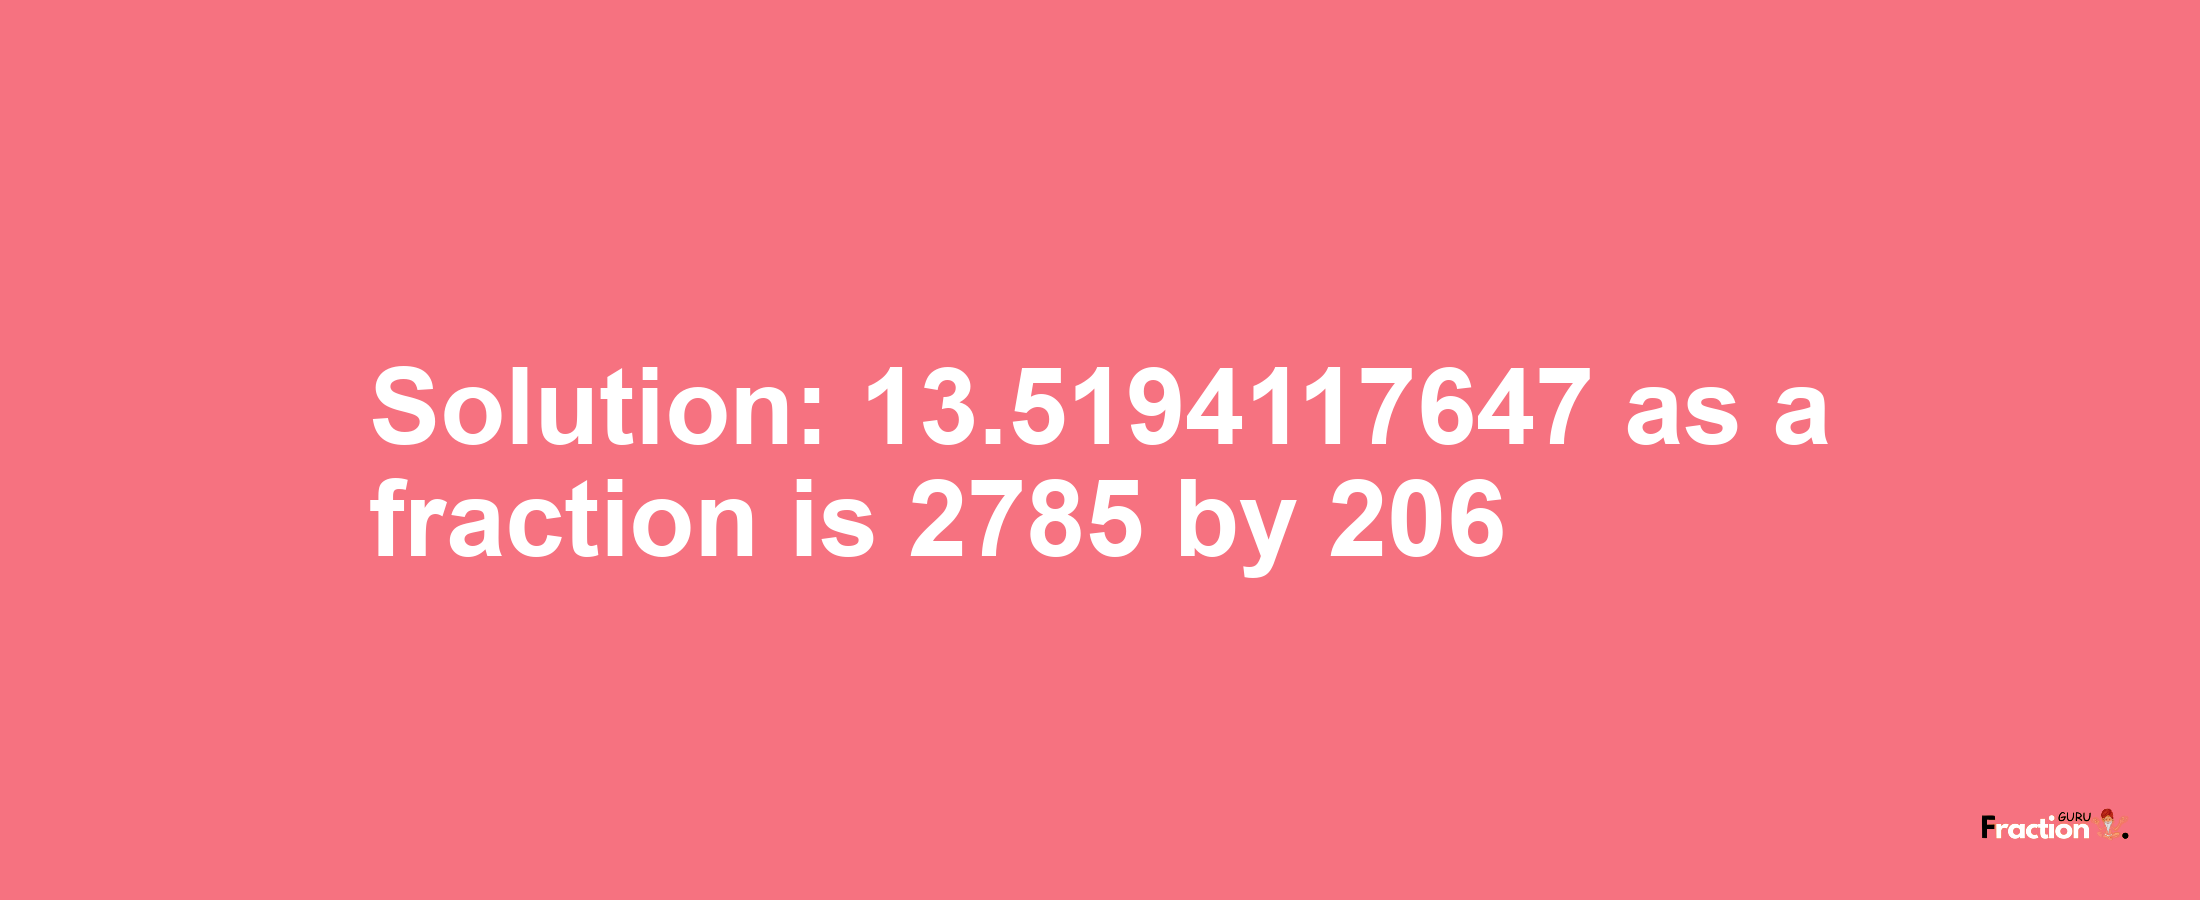 Solution:13.5194117647 as a fraction is 2785/206